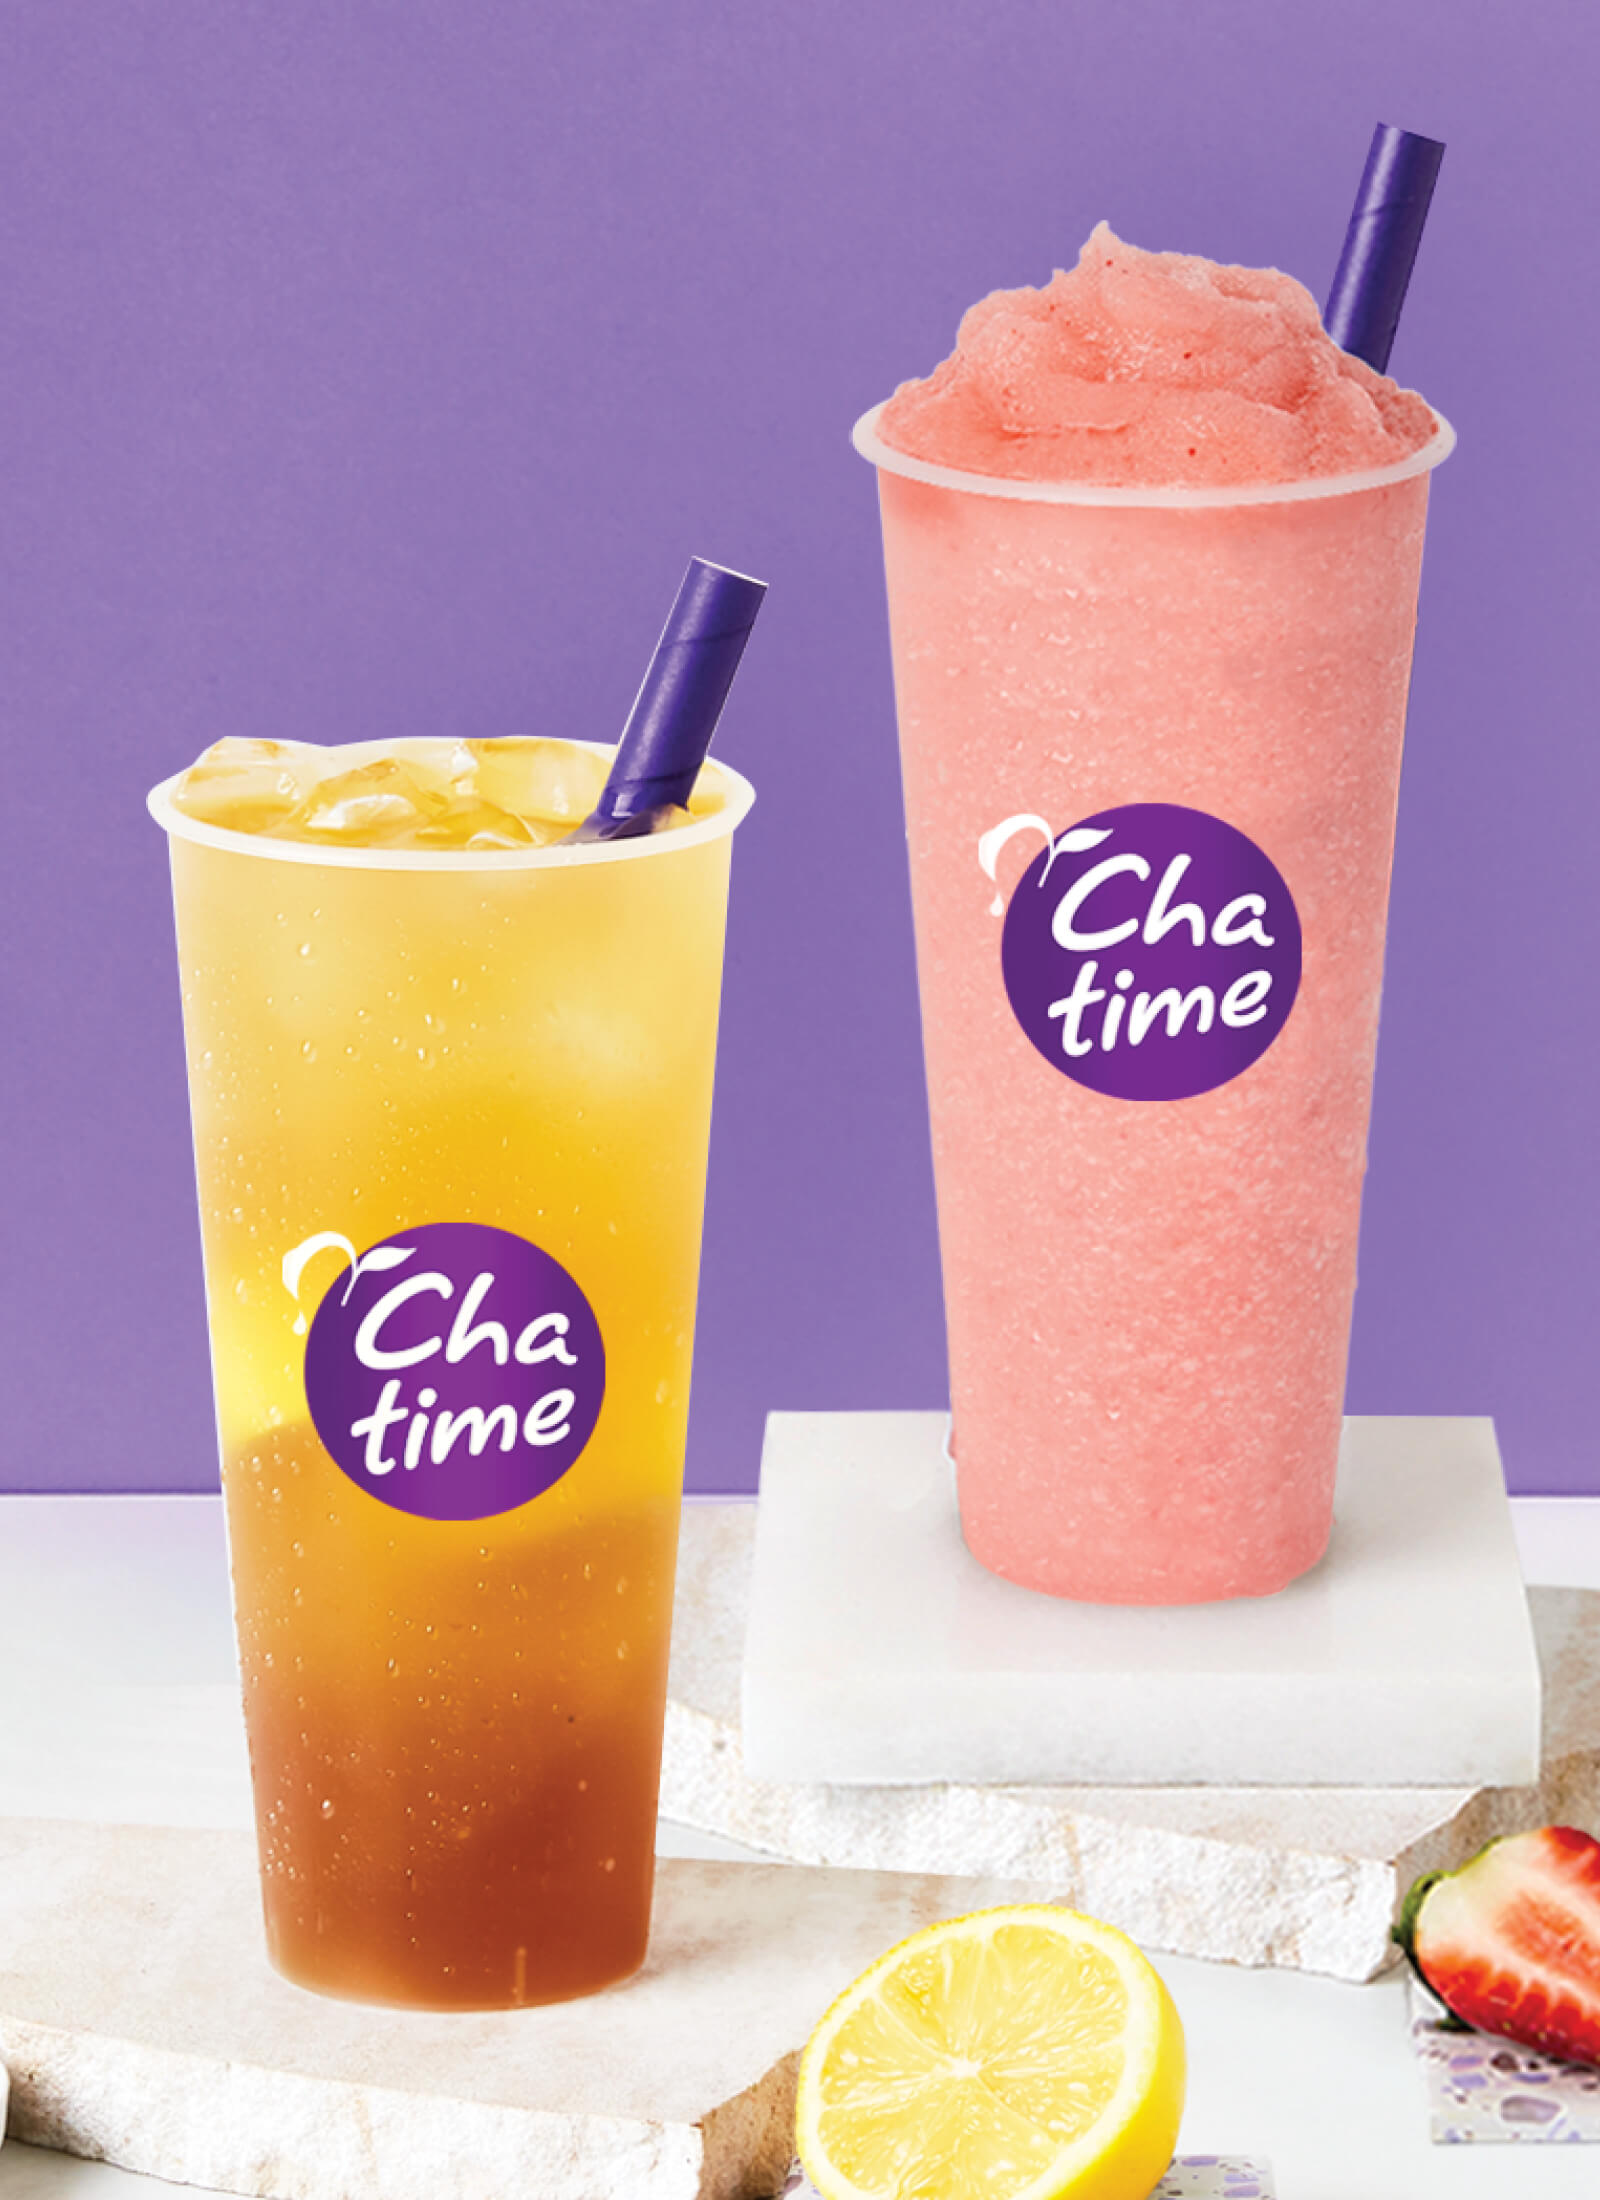 Chatime - fresh, flavourful and inventive tea beverages